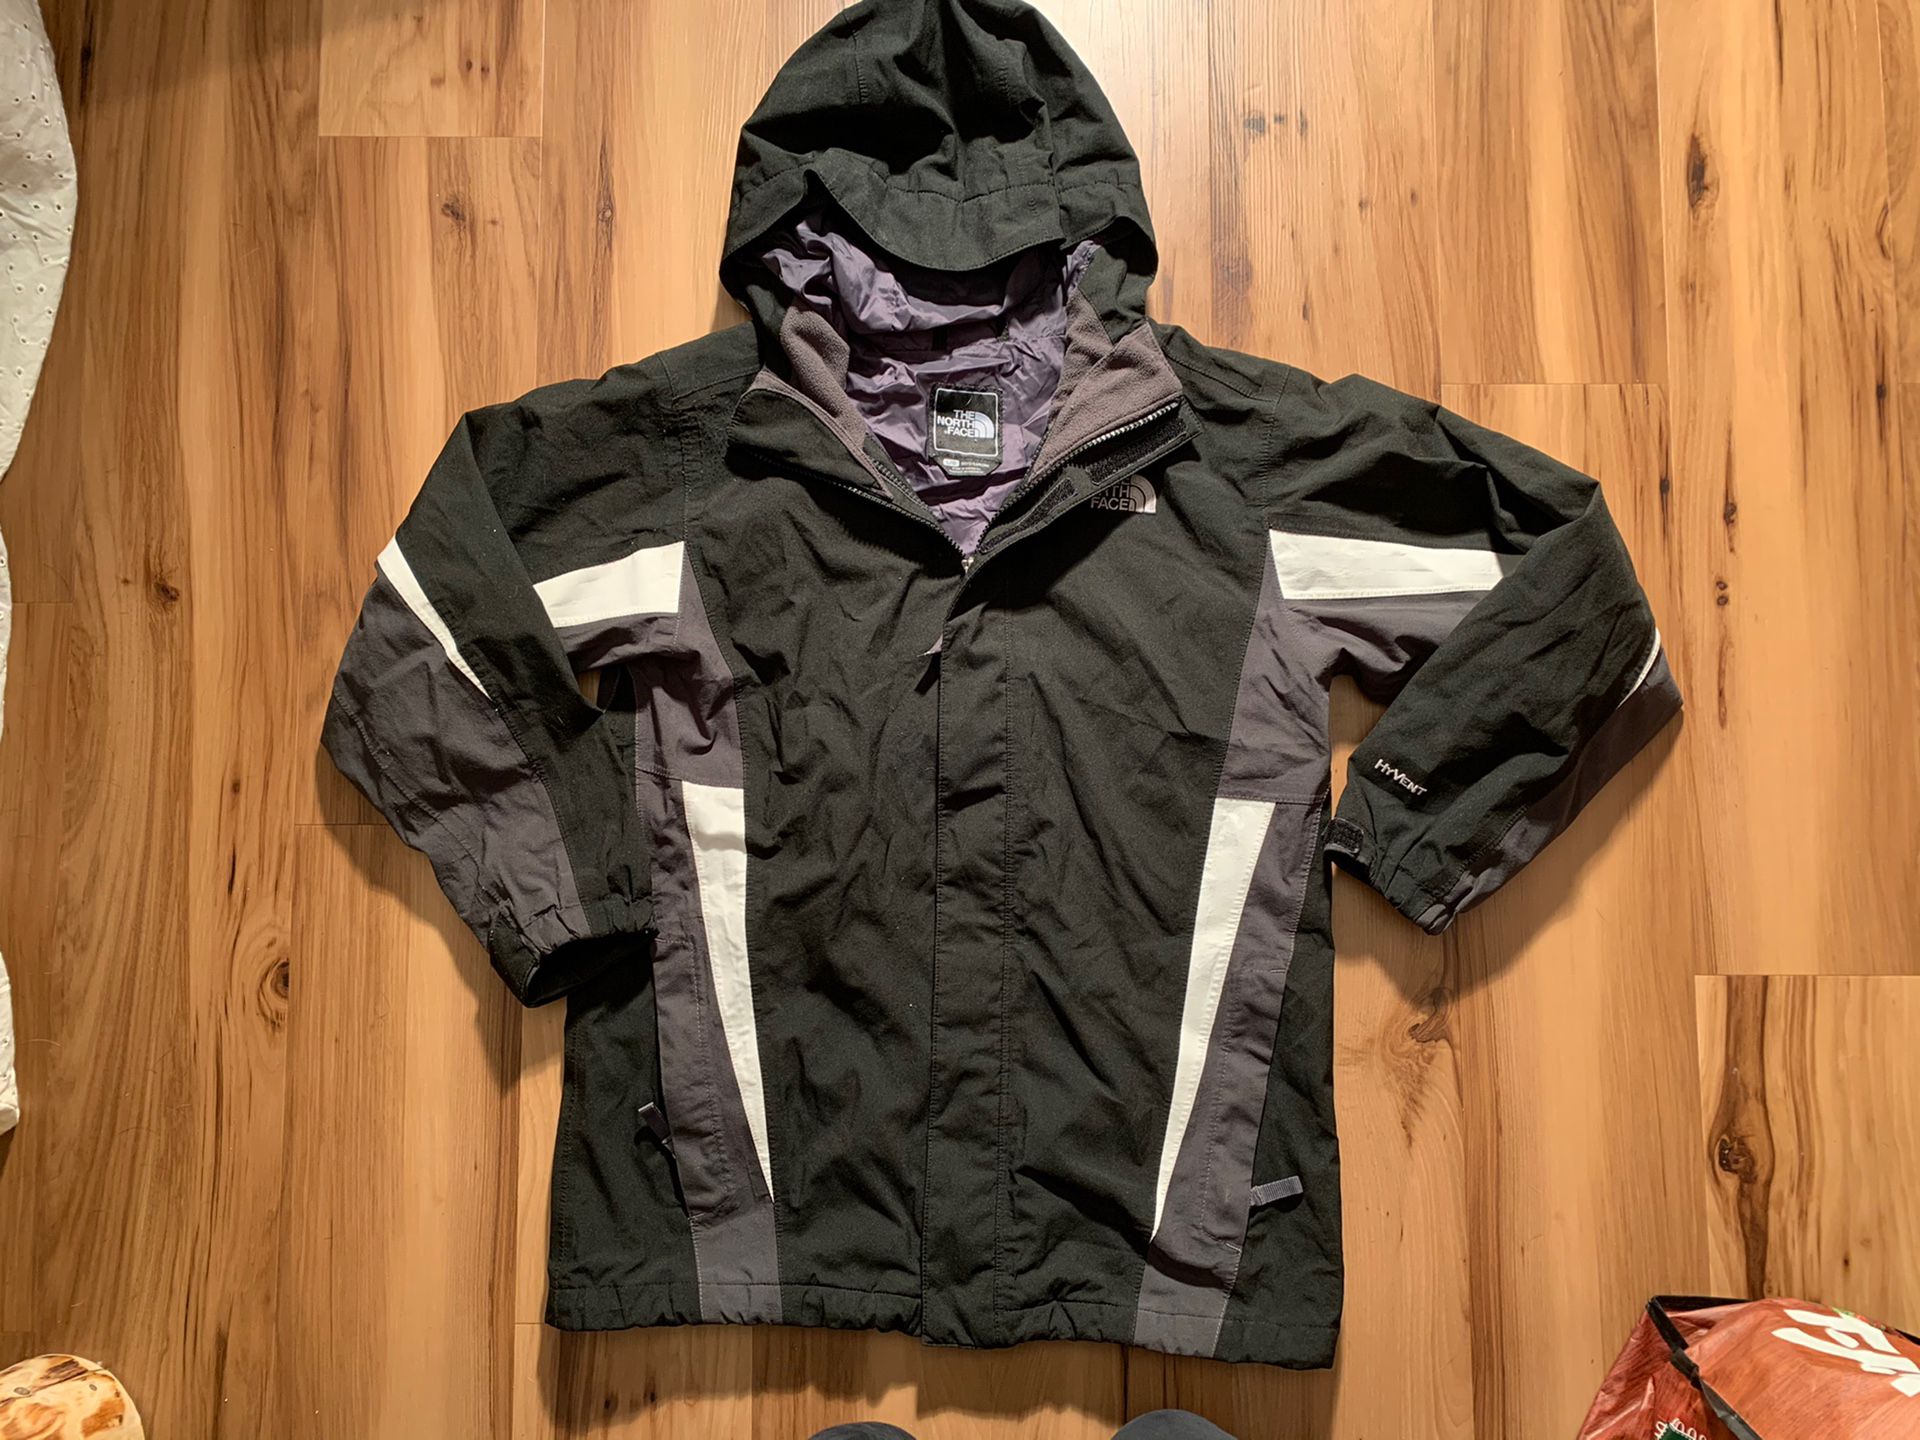 Boys She’ll the north face Size Large Hooded Black Jacket Coat